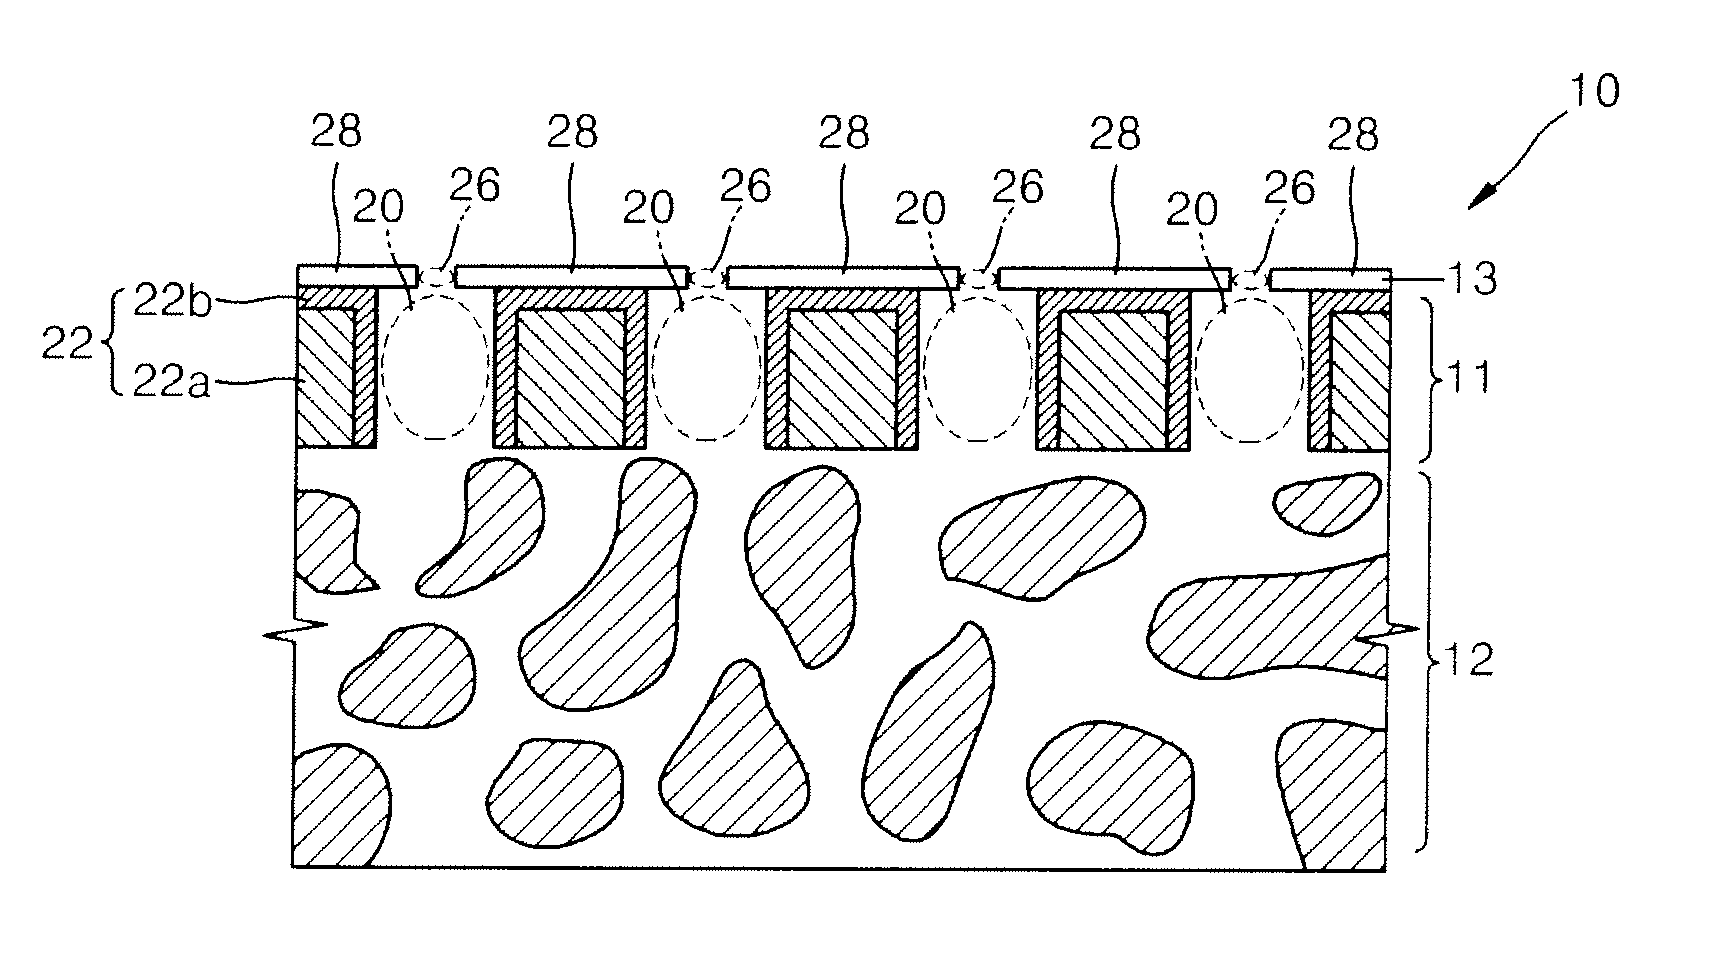 Nanoporous membrane, process of fabricating the same and device for controlled release of biopharmaceuticals comprising the same